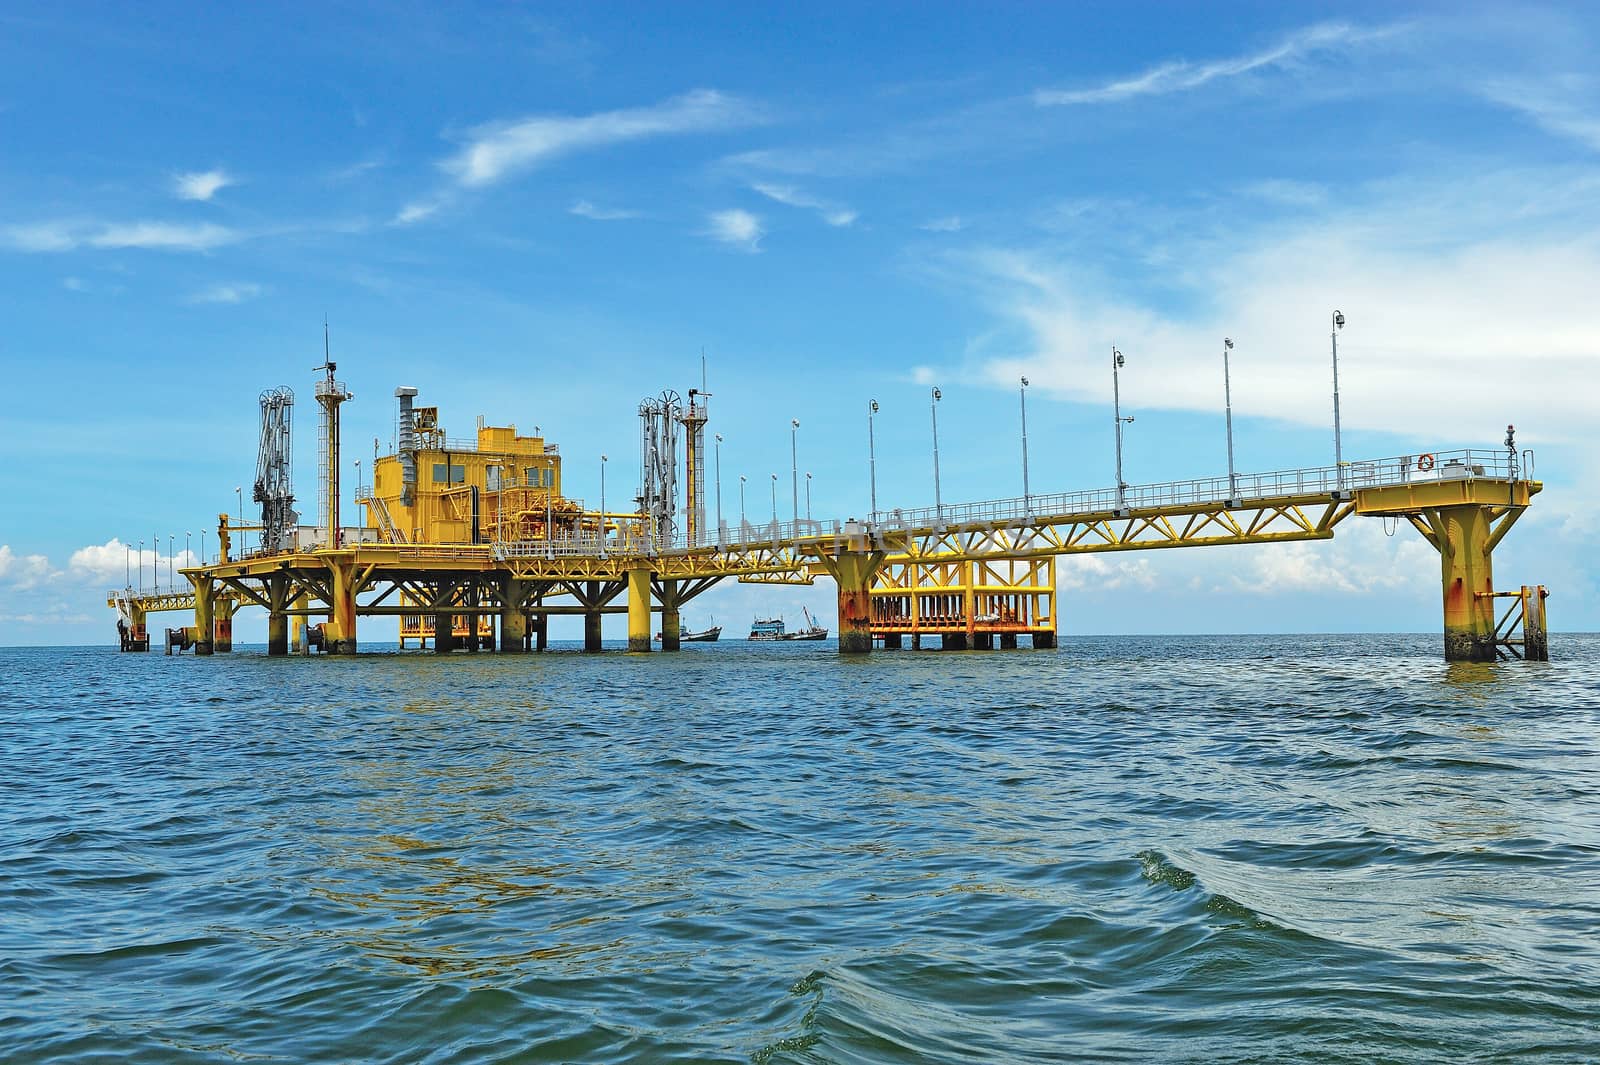 Oil transfer platforms by think4photop